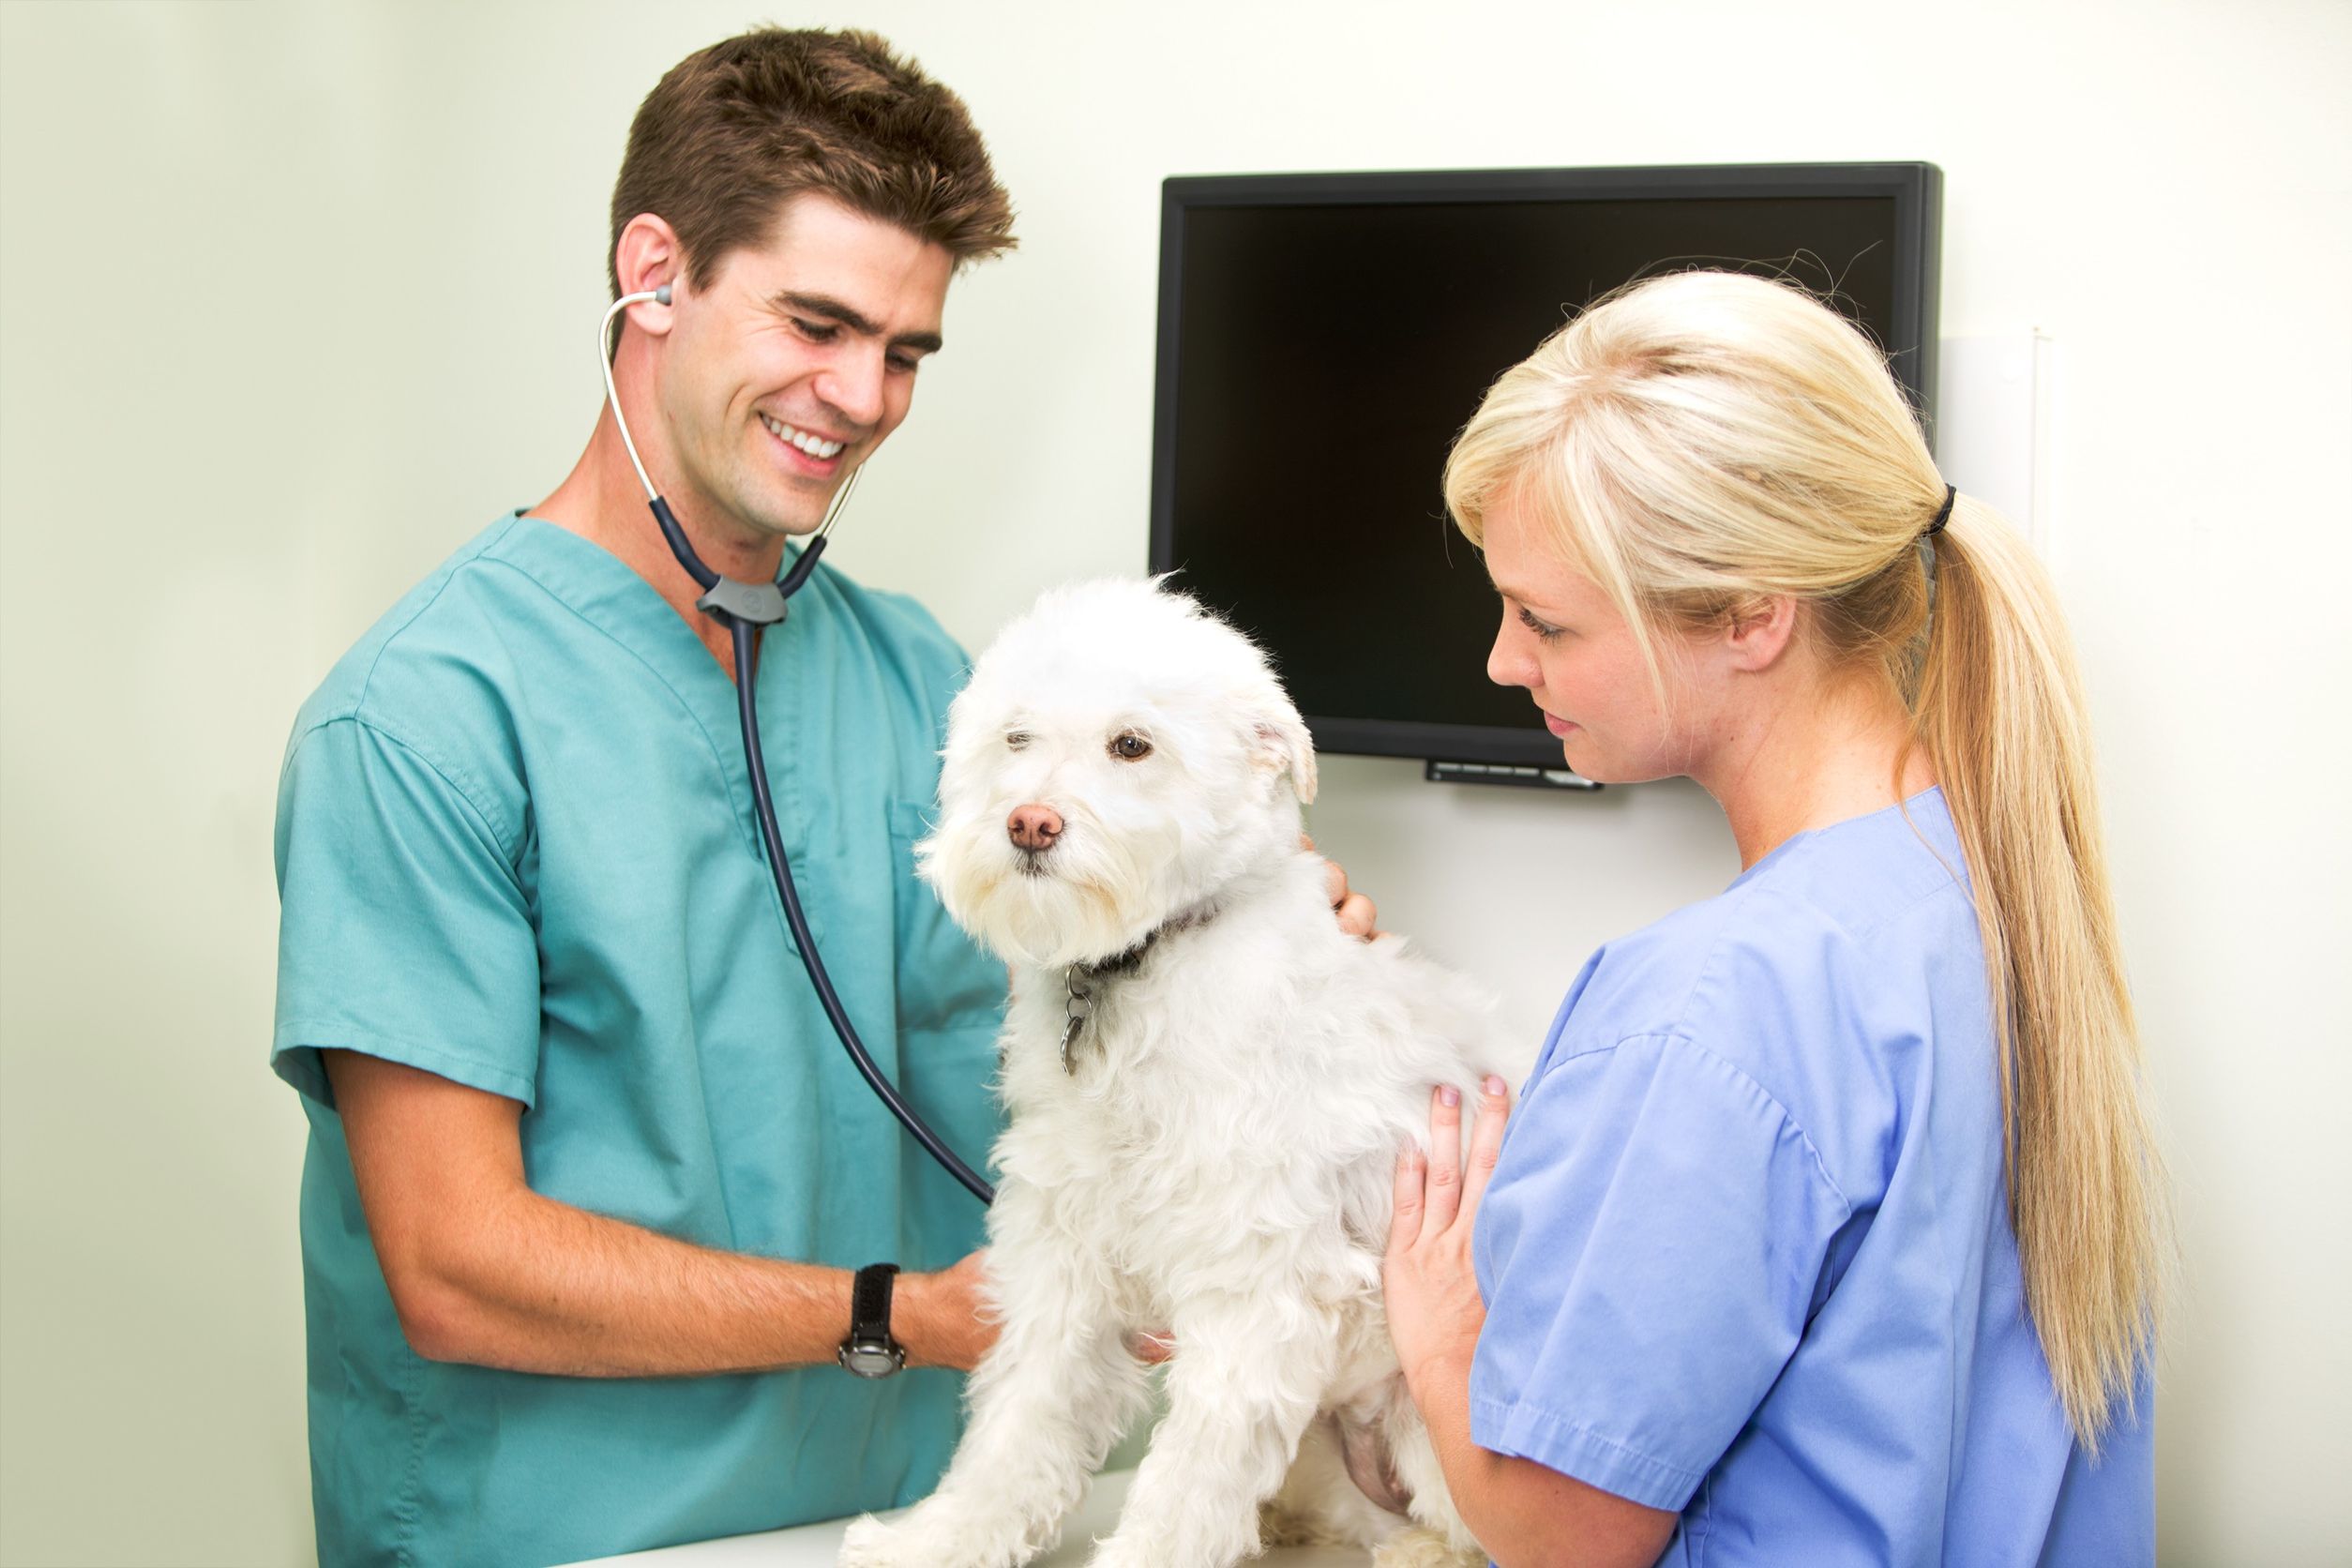 A Professional Vet Hospital in Barnegat, NJ Always Provides What Your Pet Needs and Deserves